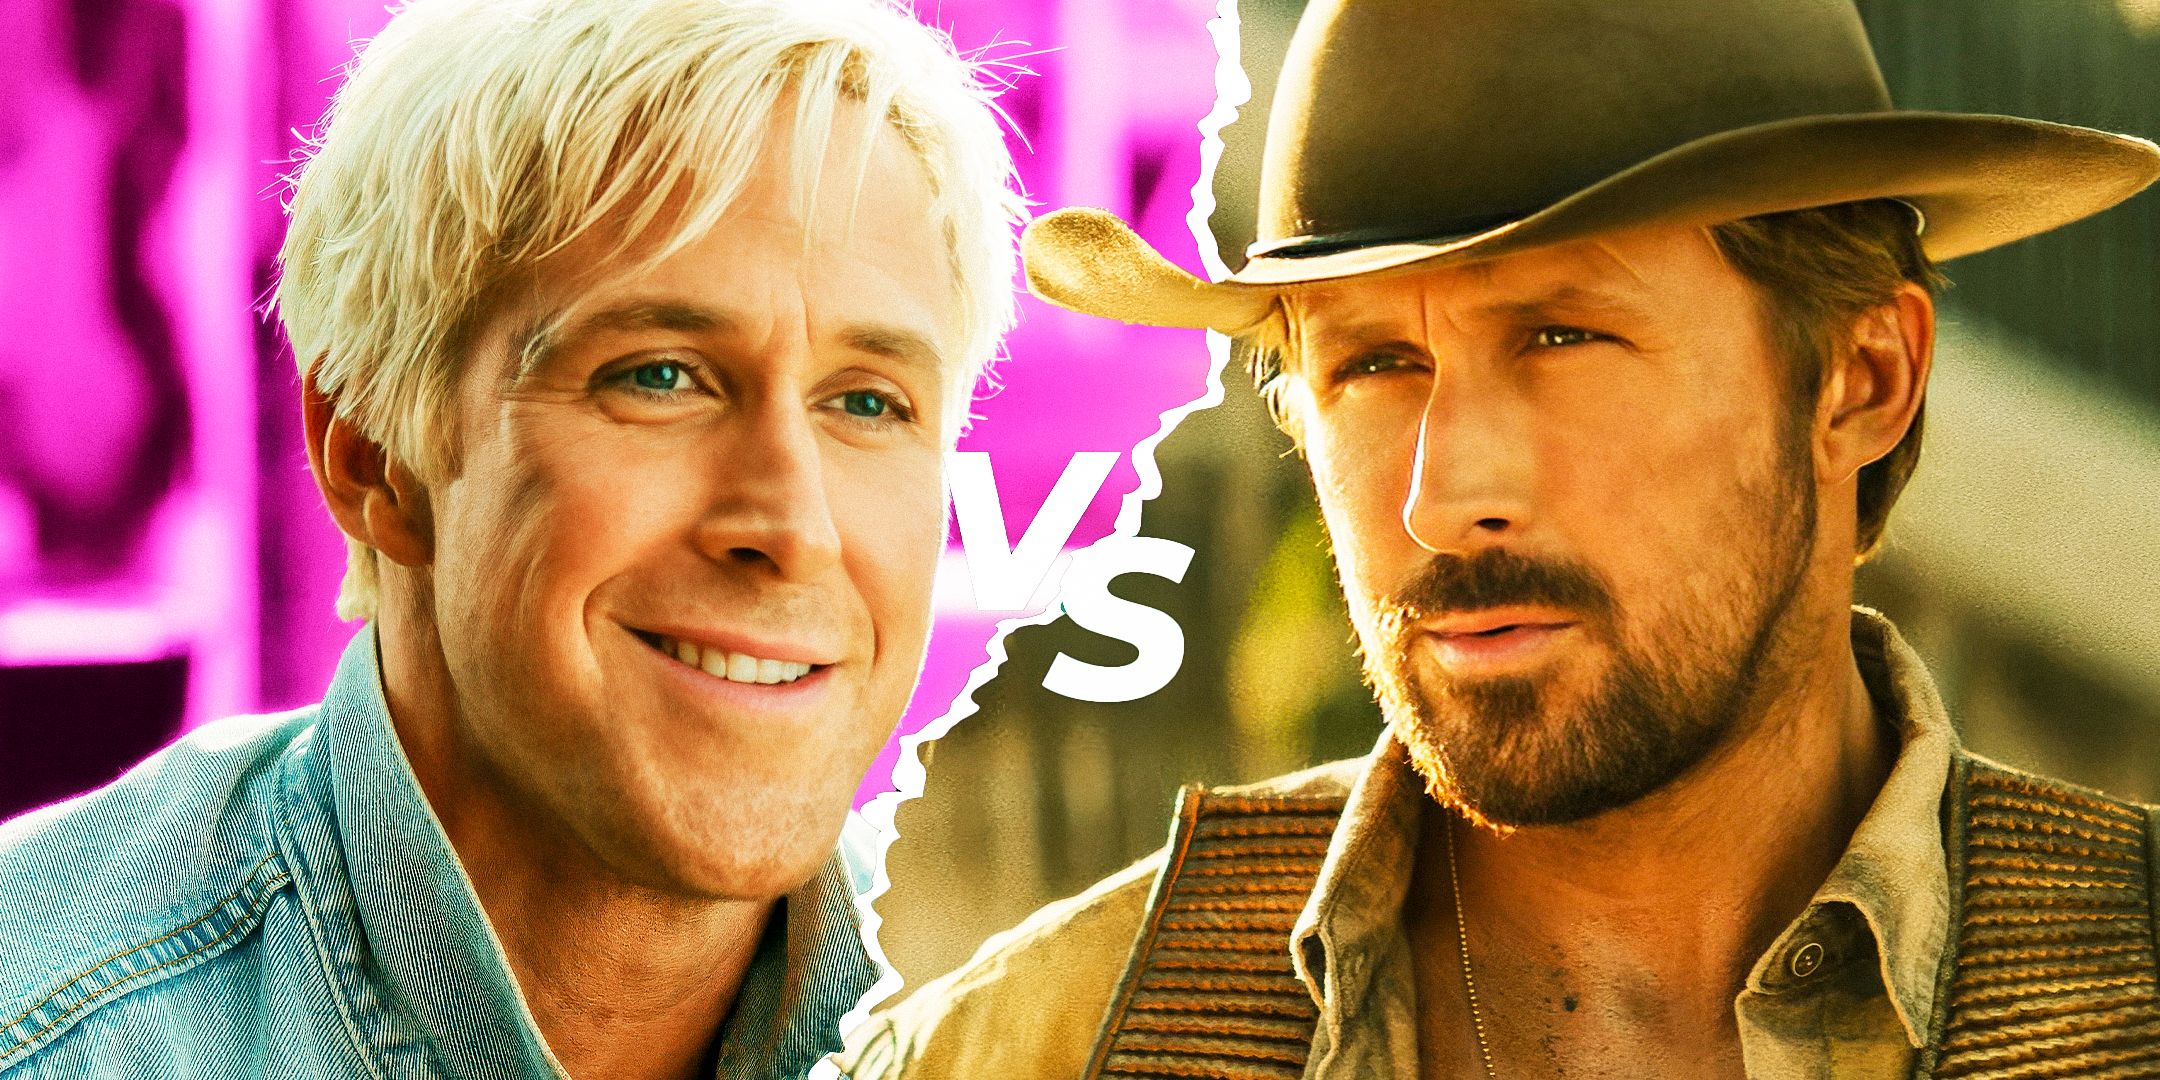 Who Did The Fall Guy’s Stunts? Ryan Gosling’s Stunt-Doubles & Stunt Team Explained